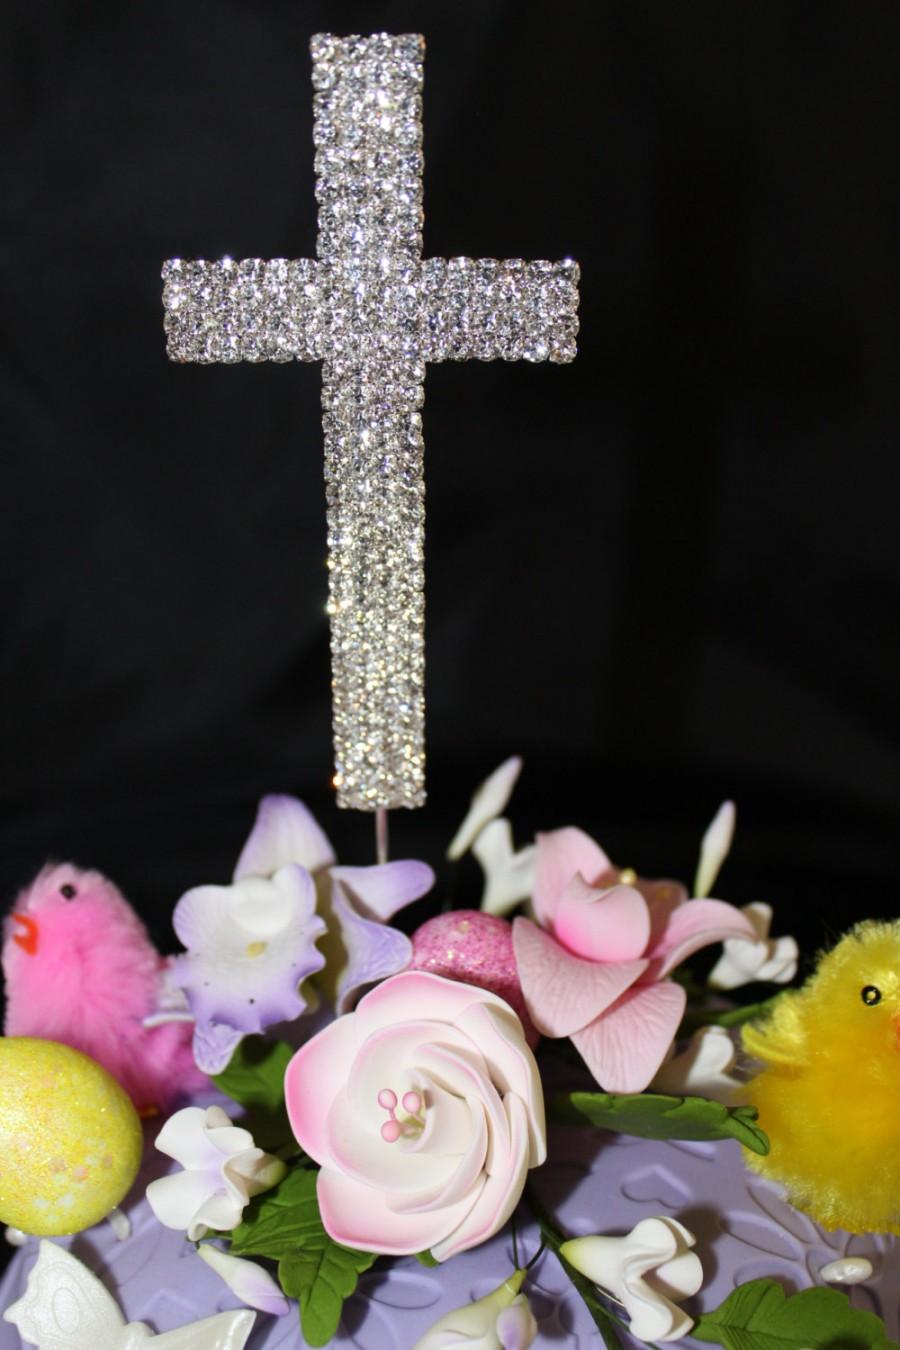 Wedding - CROSS CAKE TOPPER Rhinestone Cross, various styles,Floral Stick - Great for Baptisms,Communion, Easter, Weddings, Holidays 5"Cross,Total 10"